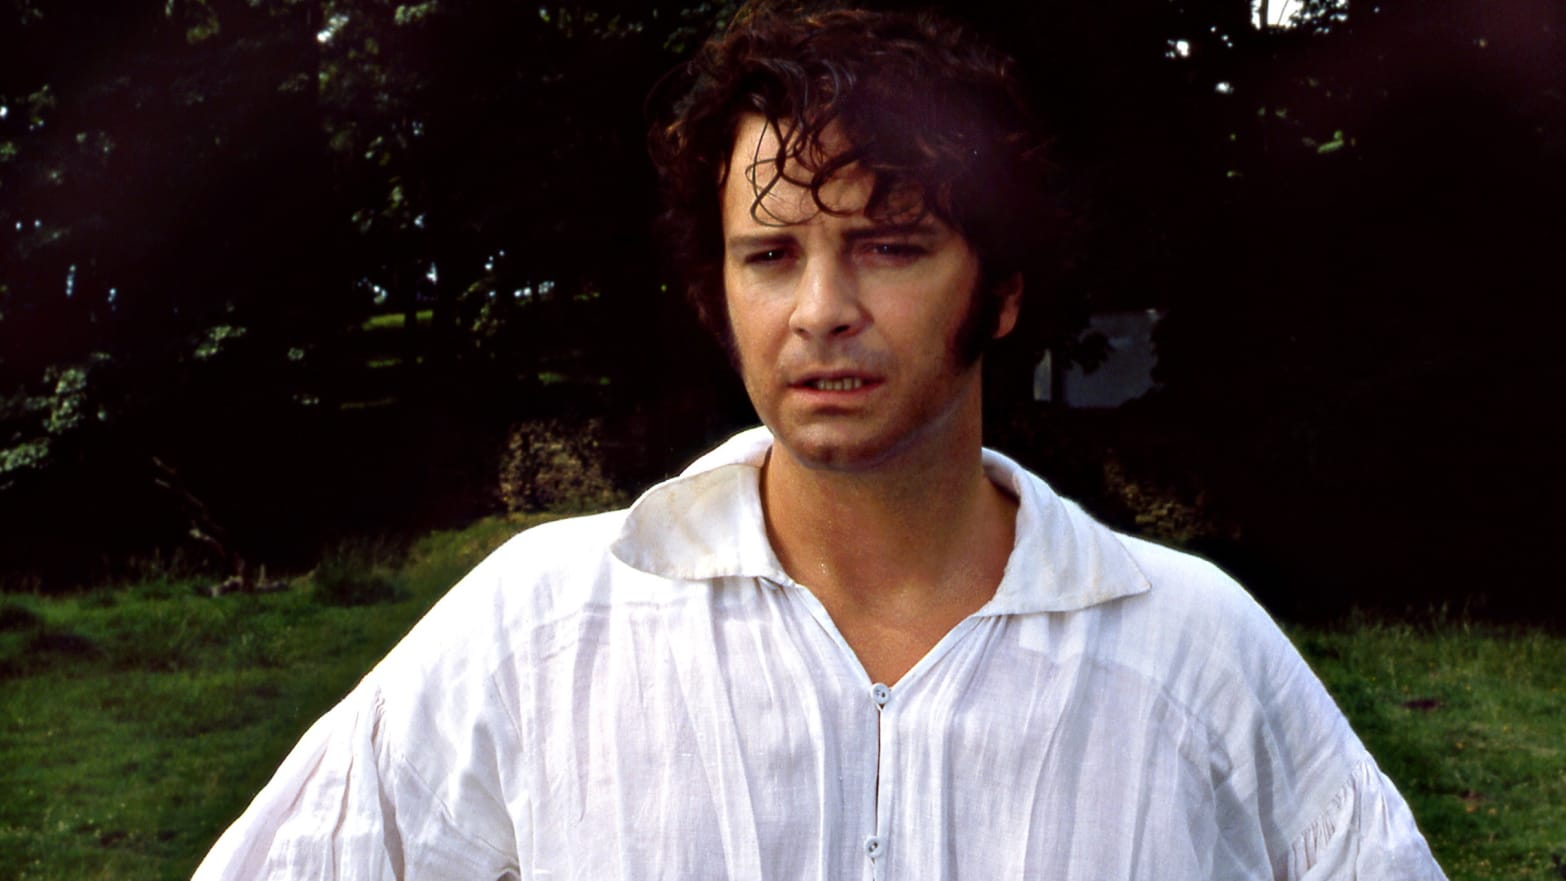 Colin Firth’s iconic billowy white shirt, as seen on a sopping-wet Mr. Darcy the BBC’s 1995 adaptation of Pride and Prejudice, was sold at auction on Tuesday. 